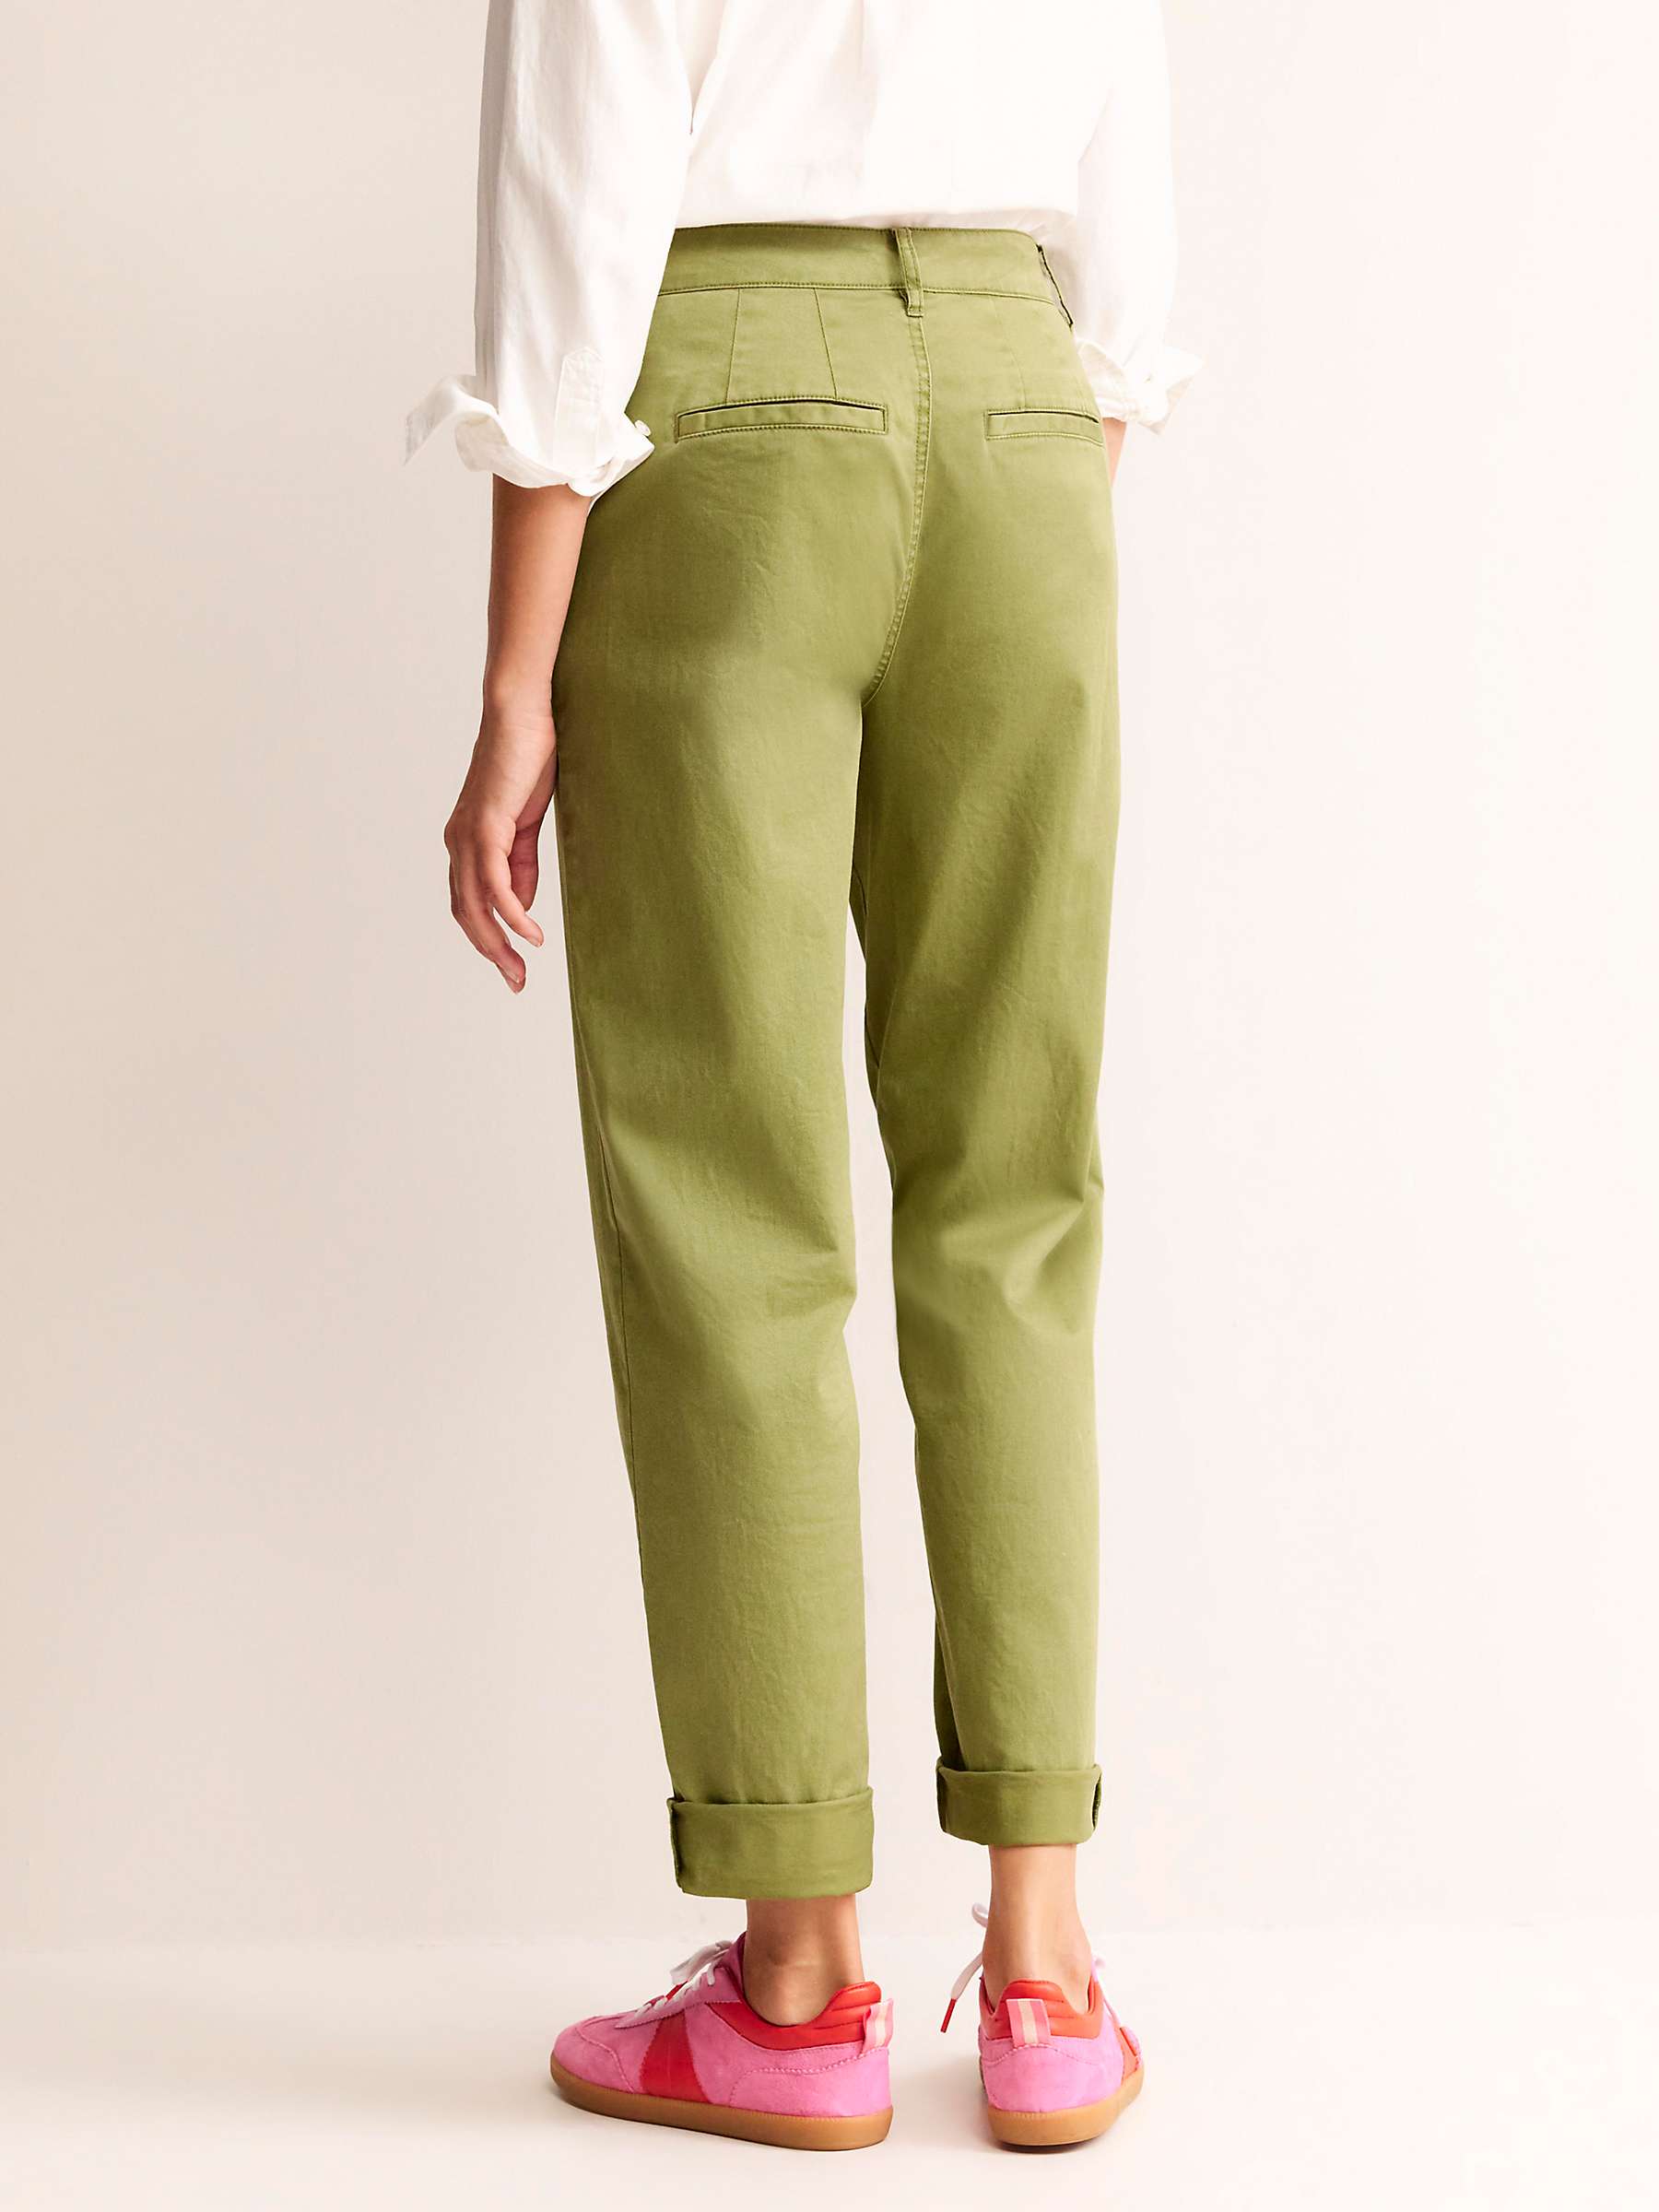 Buy Boden Barnsbury Chino Trousers, Mayfly Online at johnlewis.com